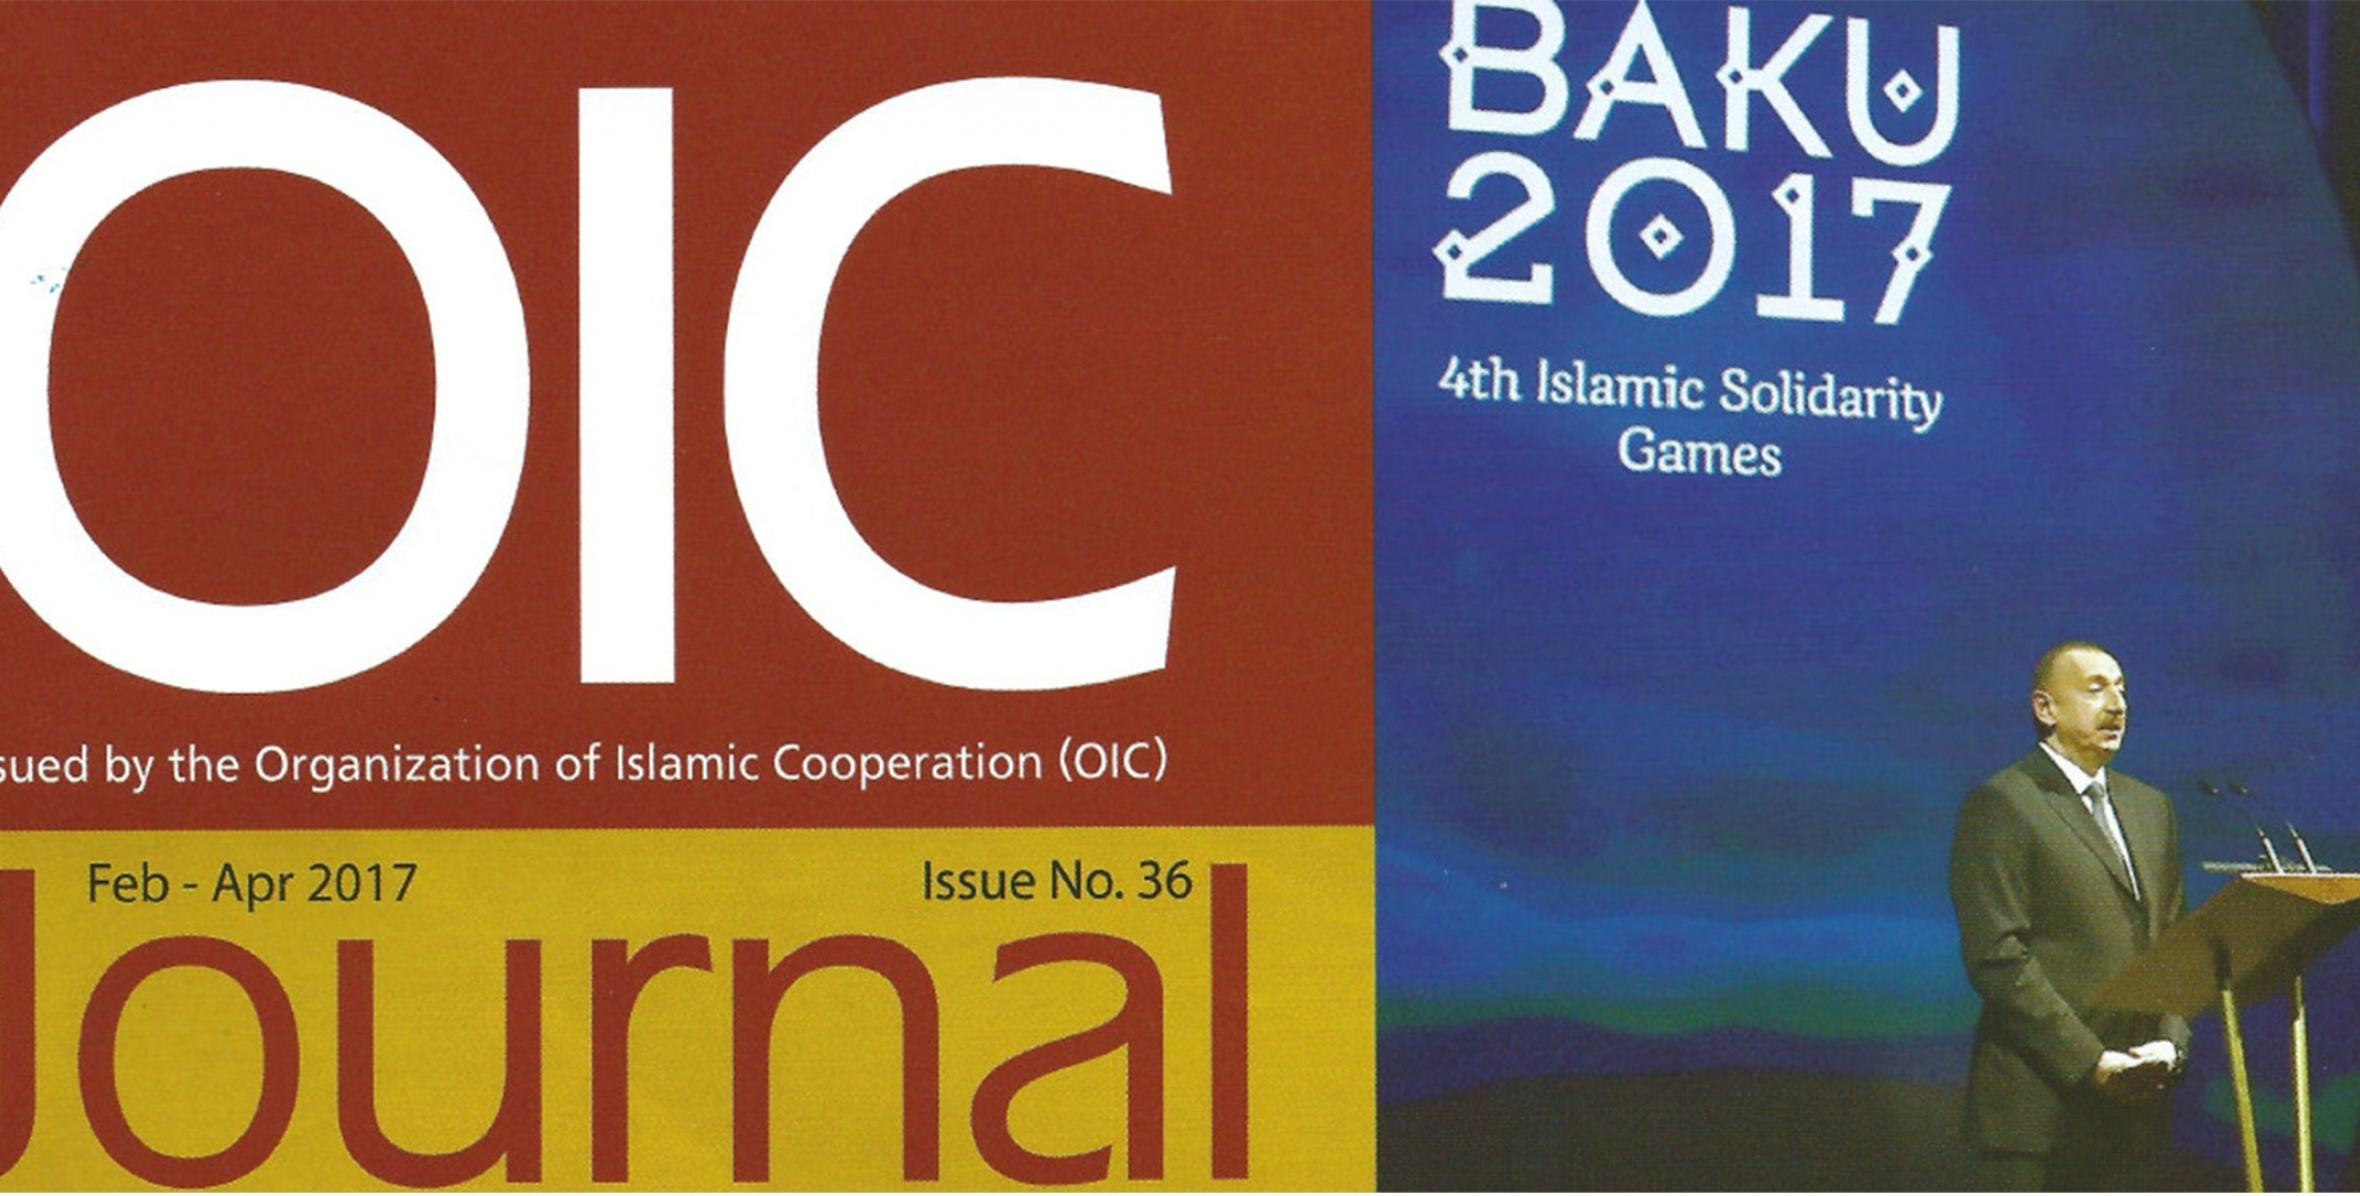 OIC Journal has published an article headlined “The strengthening of Islamic solidarity is a challenge of time” by Ilham Aliyev